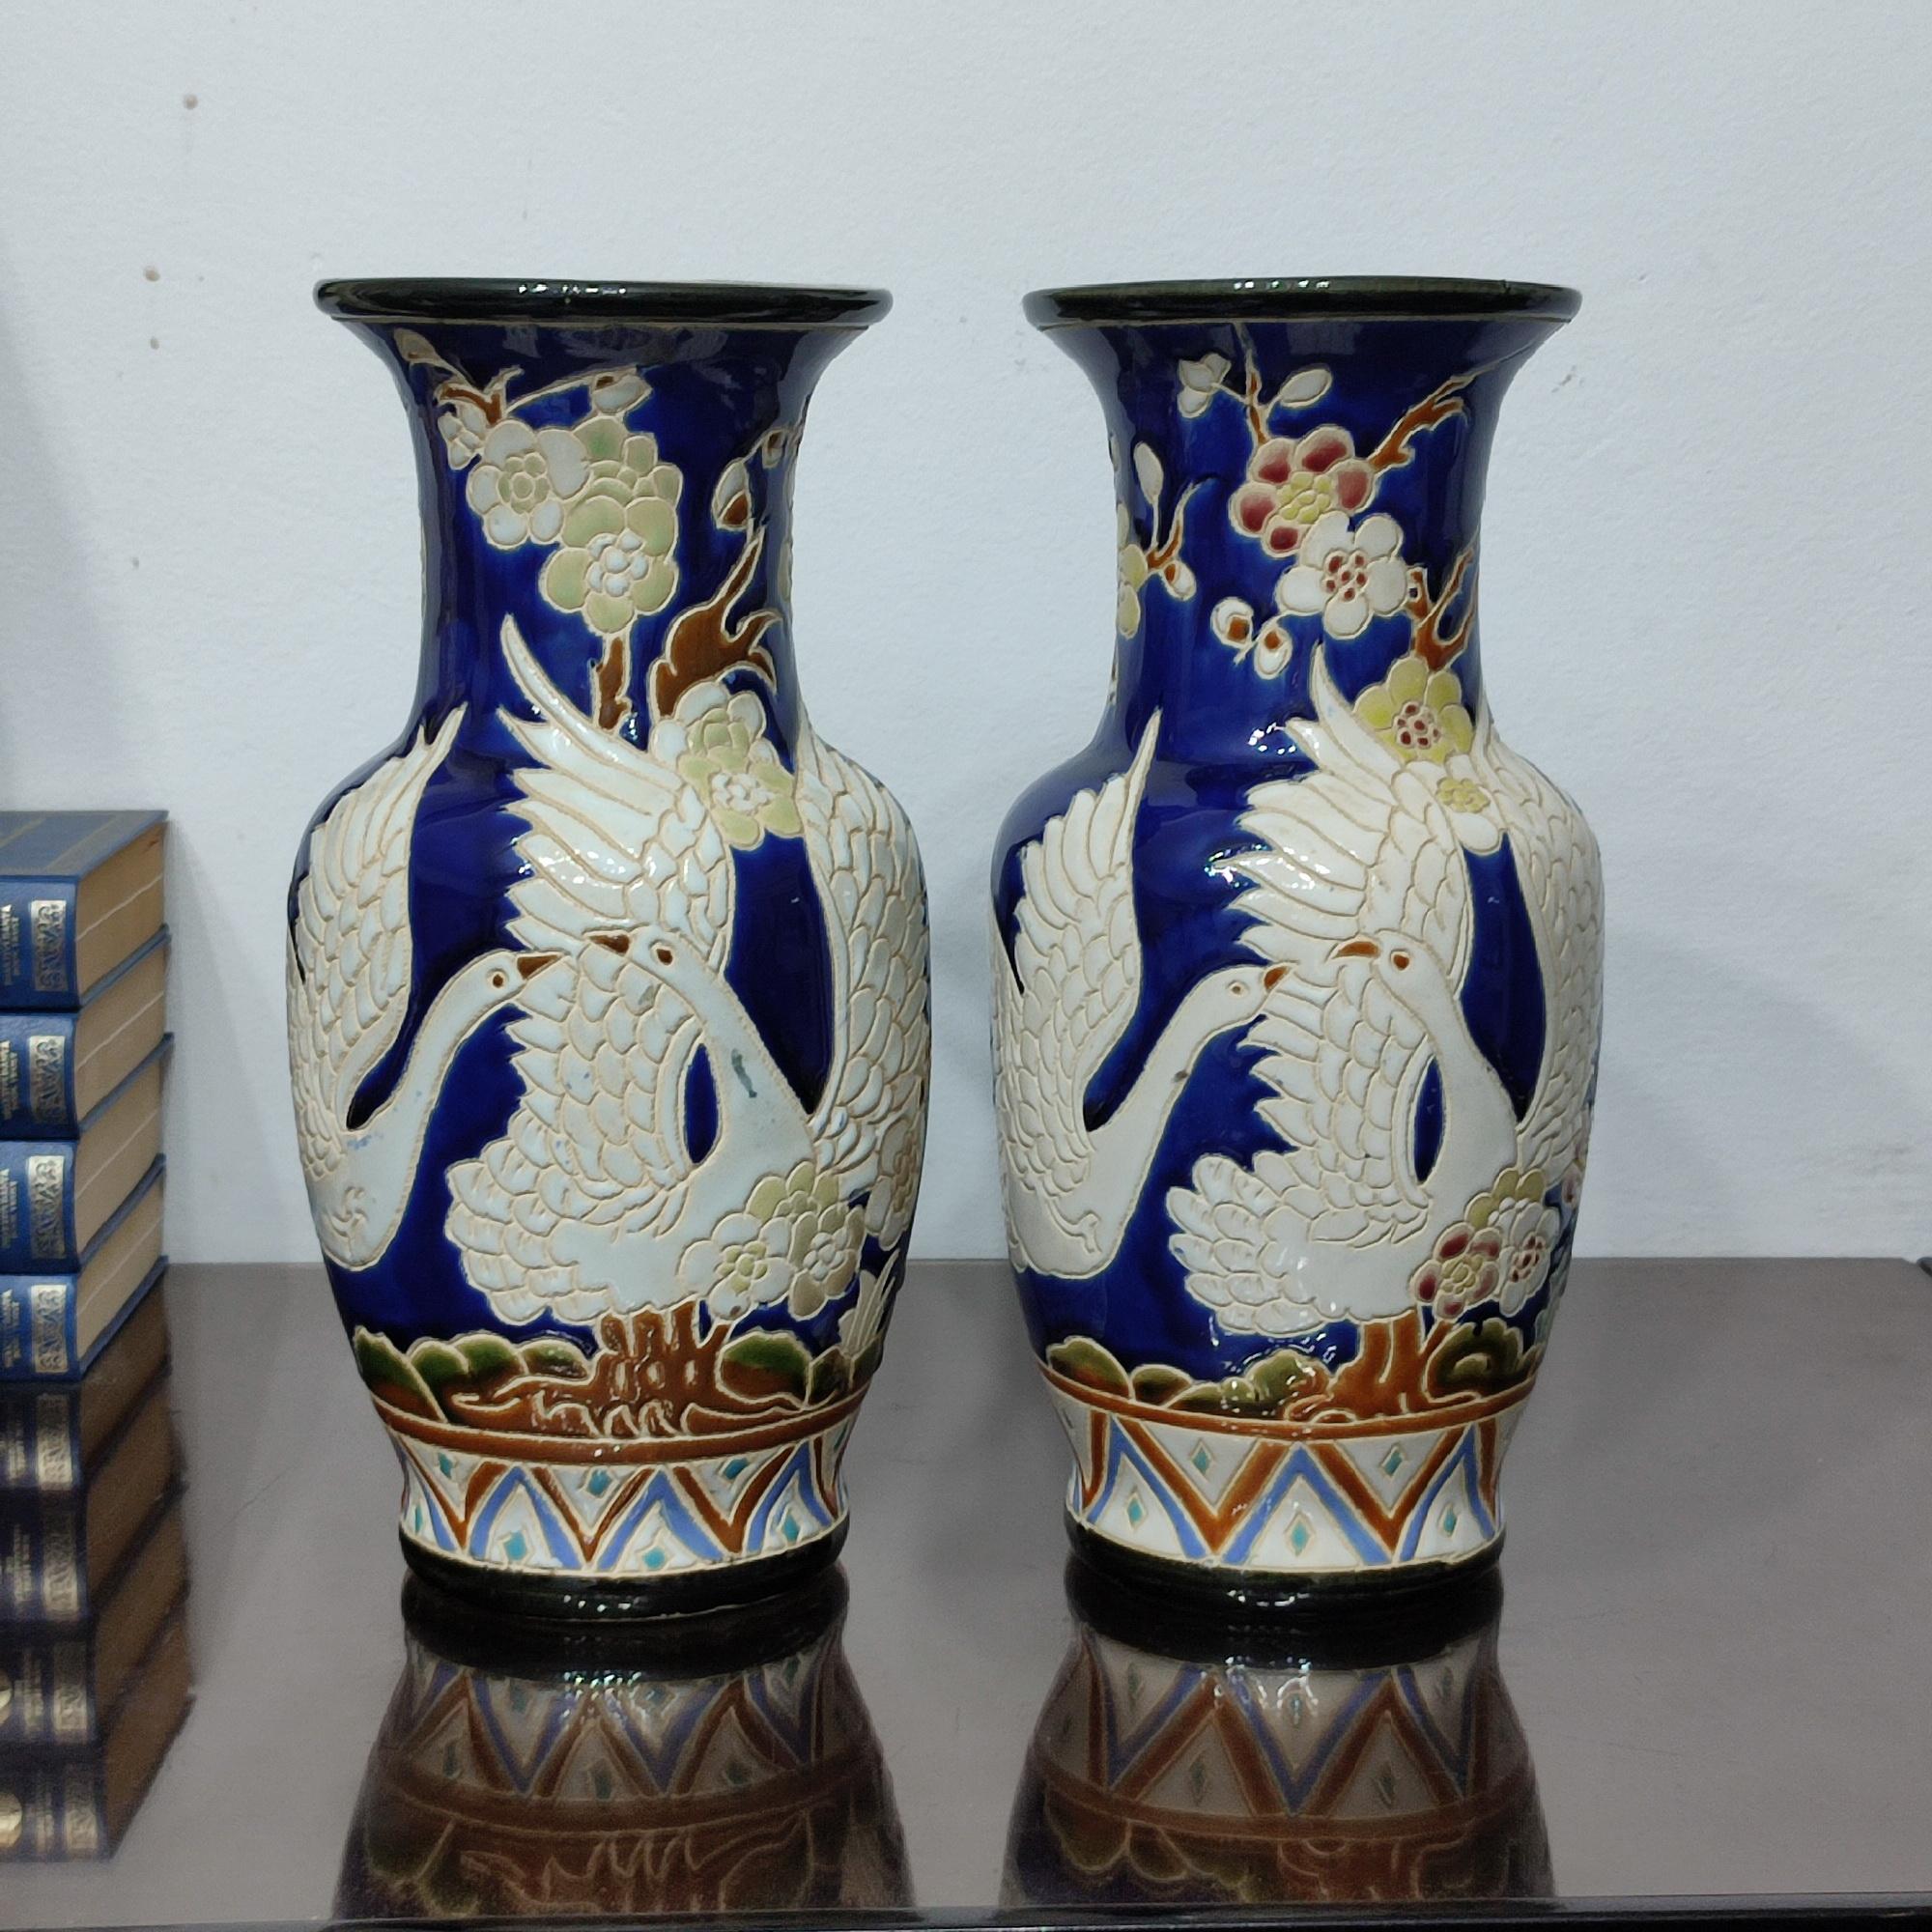 Amazing pair of Scandinavian pottery vases, decorated all around with flying swans, richly decorated with colorful glaze, cherry flowers and branches against a royal blue background, with oriental influence. Atelier pieces, hand marks on the